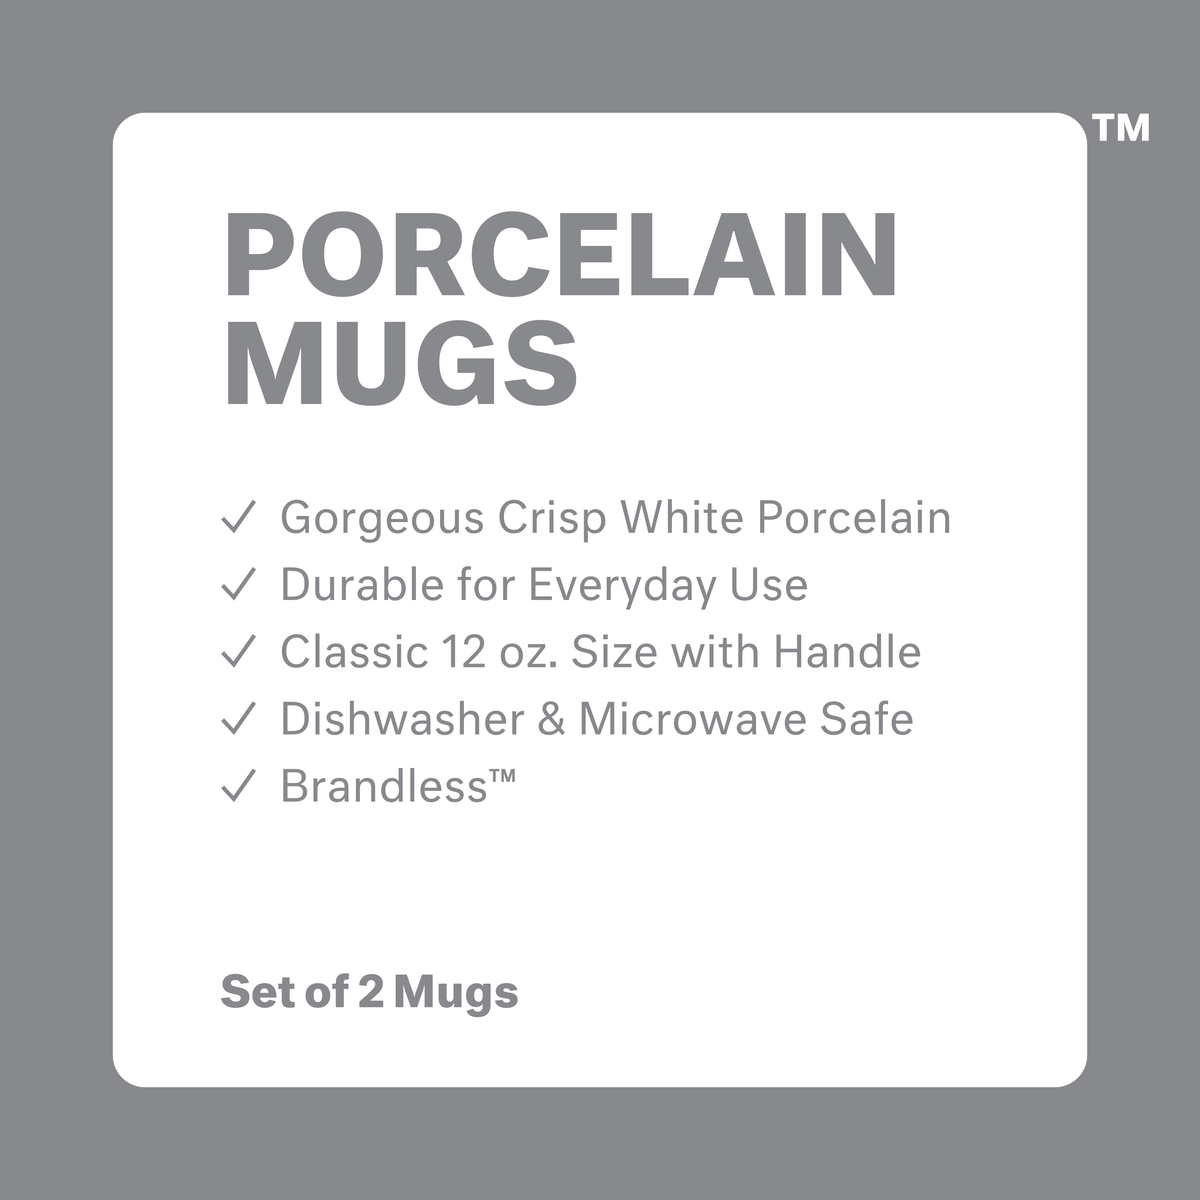 Porcelain Mugs: gorgeous crisp white porcelain, durable for everyday use, classic 12 oz size with handle, dishwasher and microwave safe, Brandless. Set of 2 mugs.